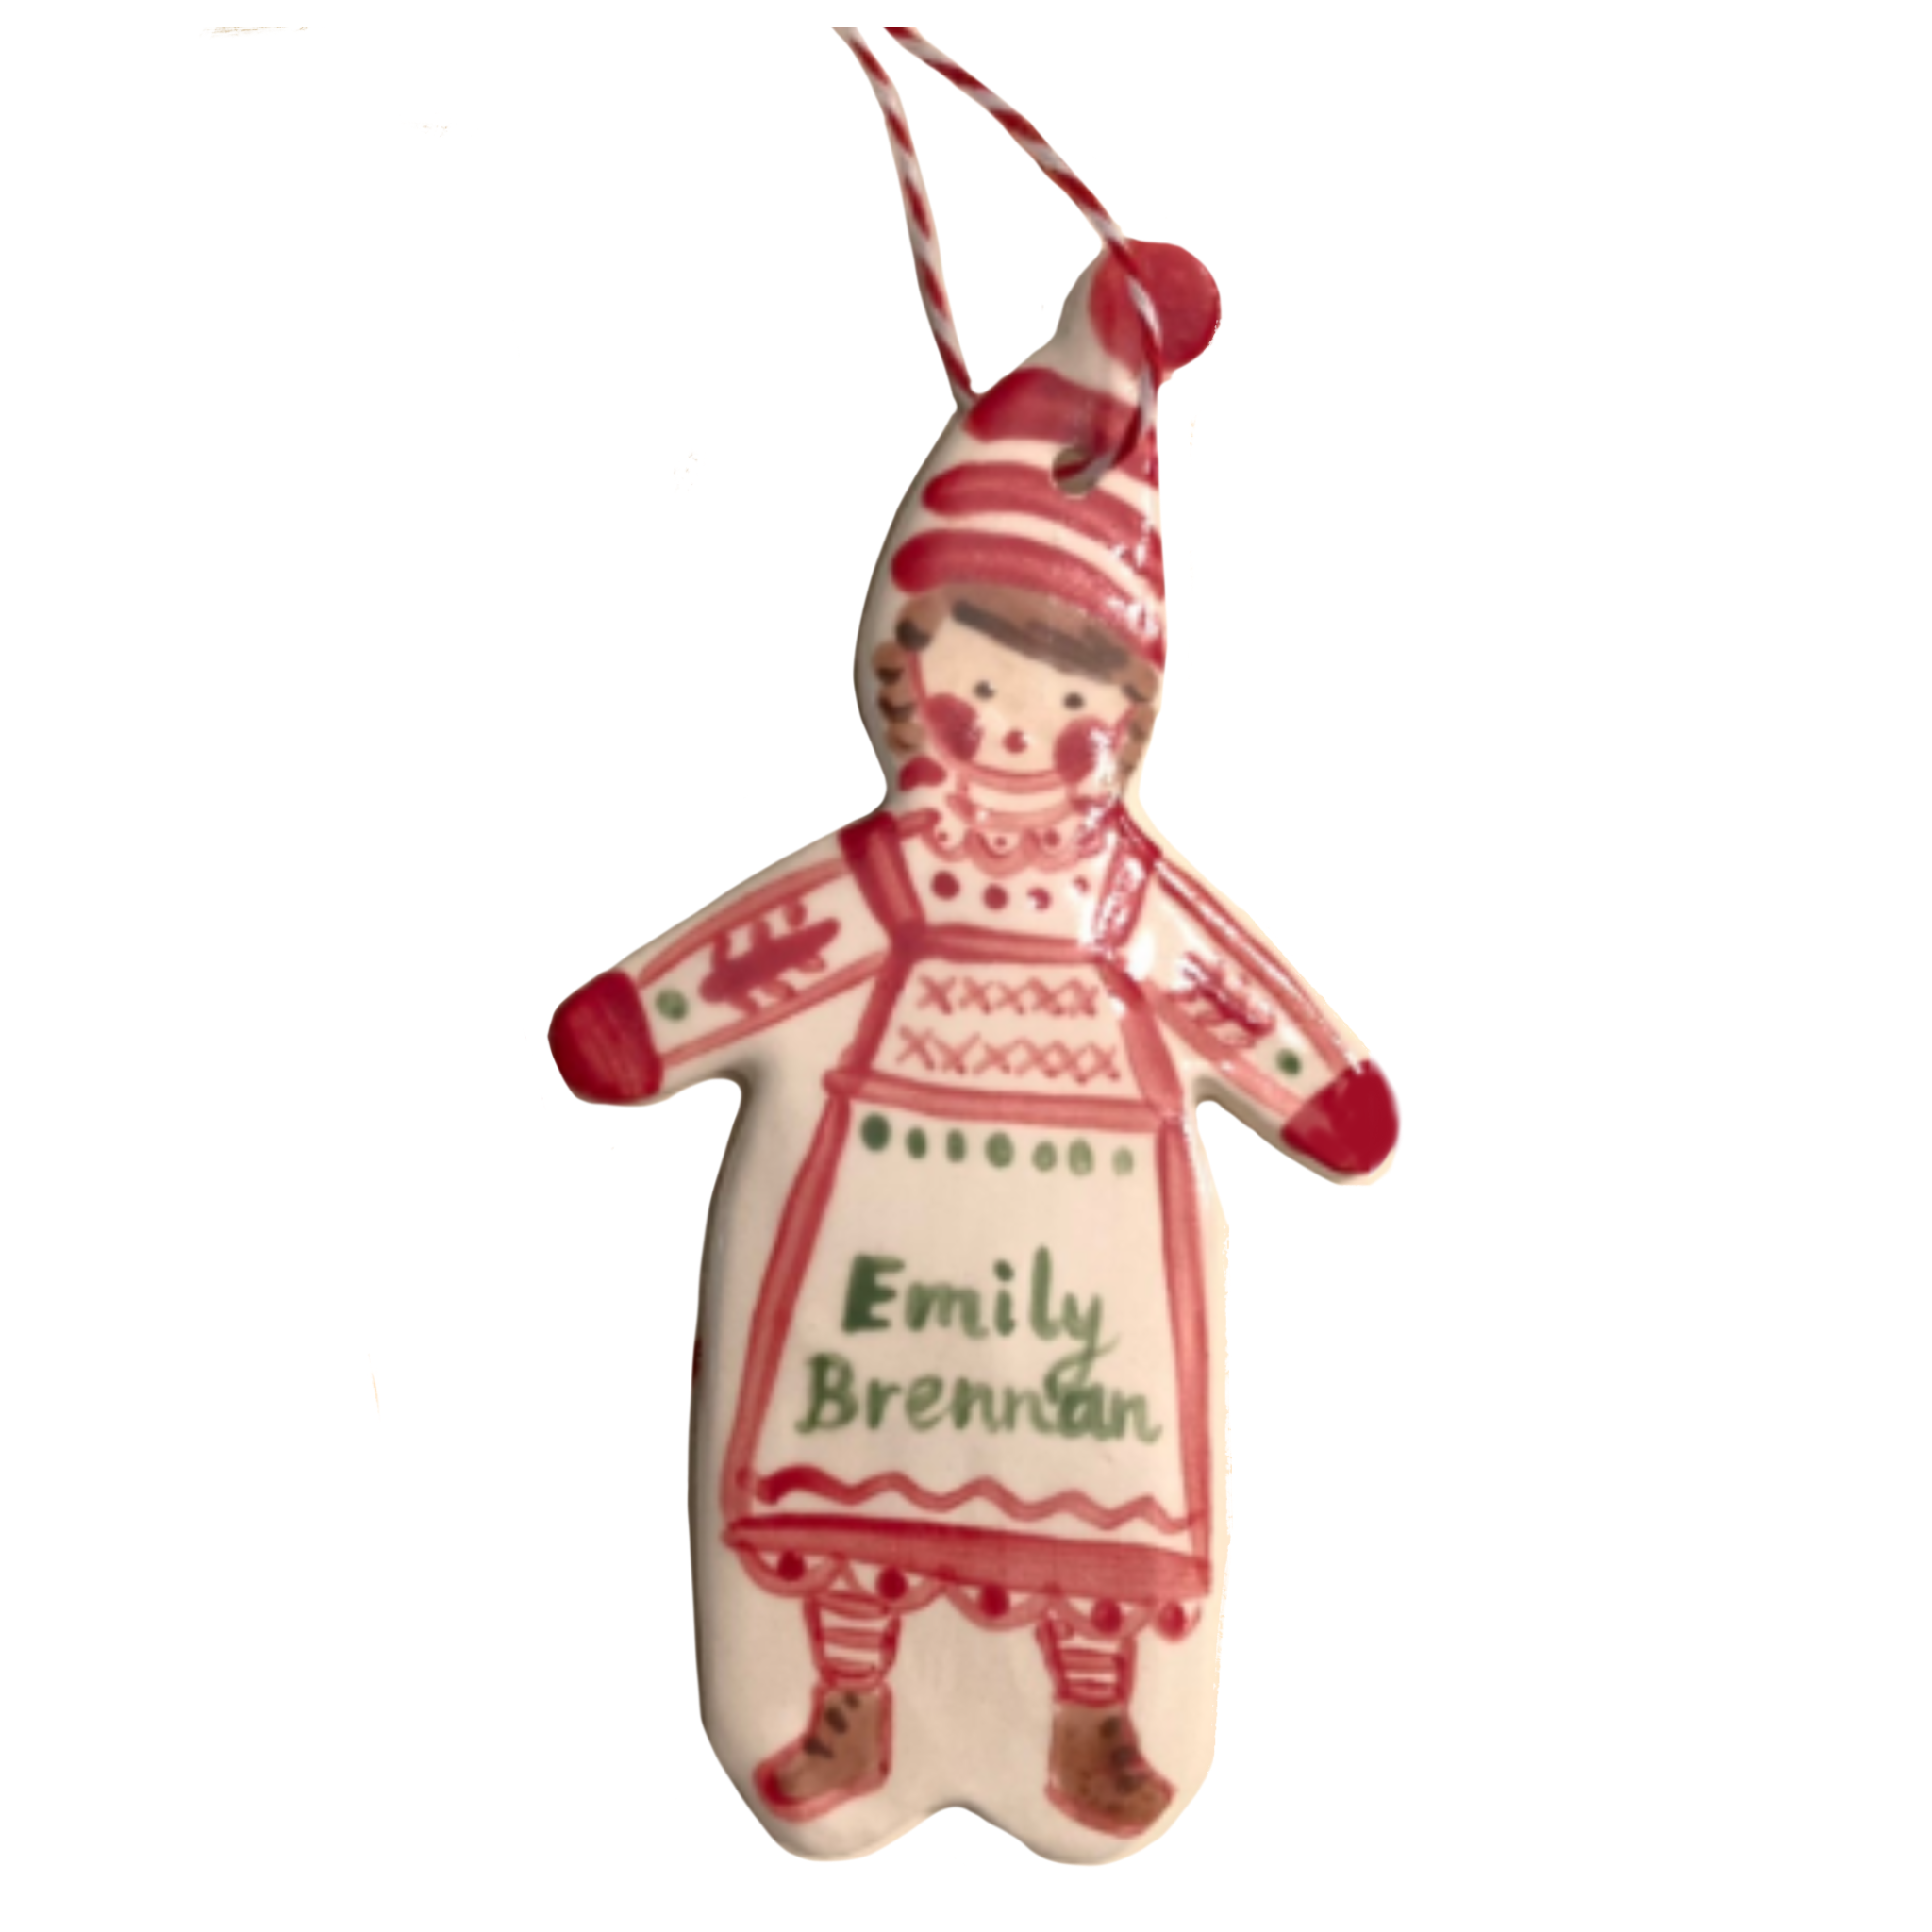 Red Pinafore Girl Ornament - Tricia Lowenfield Design